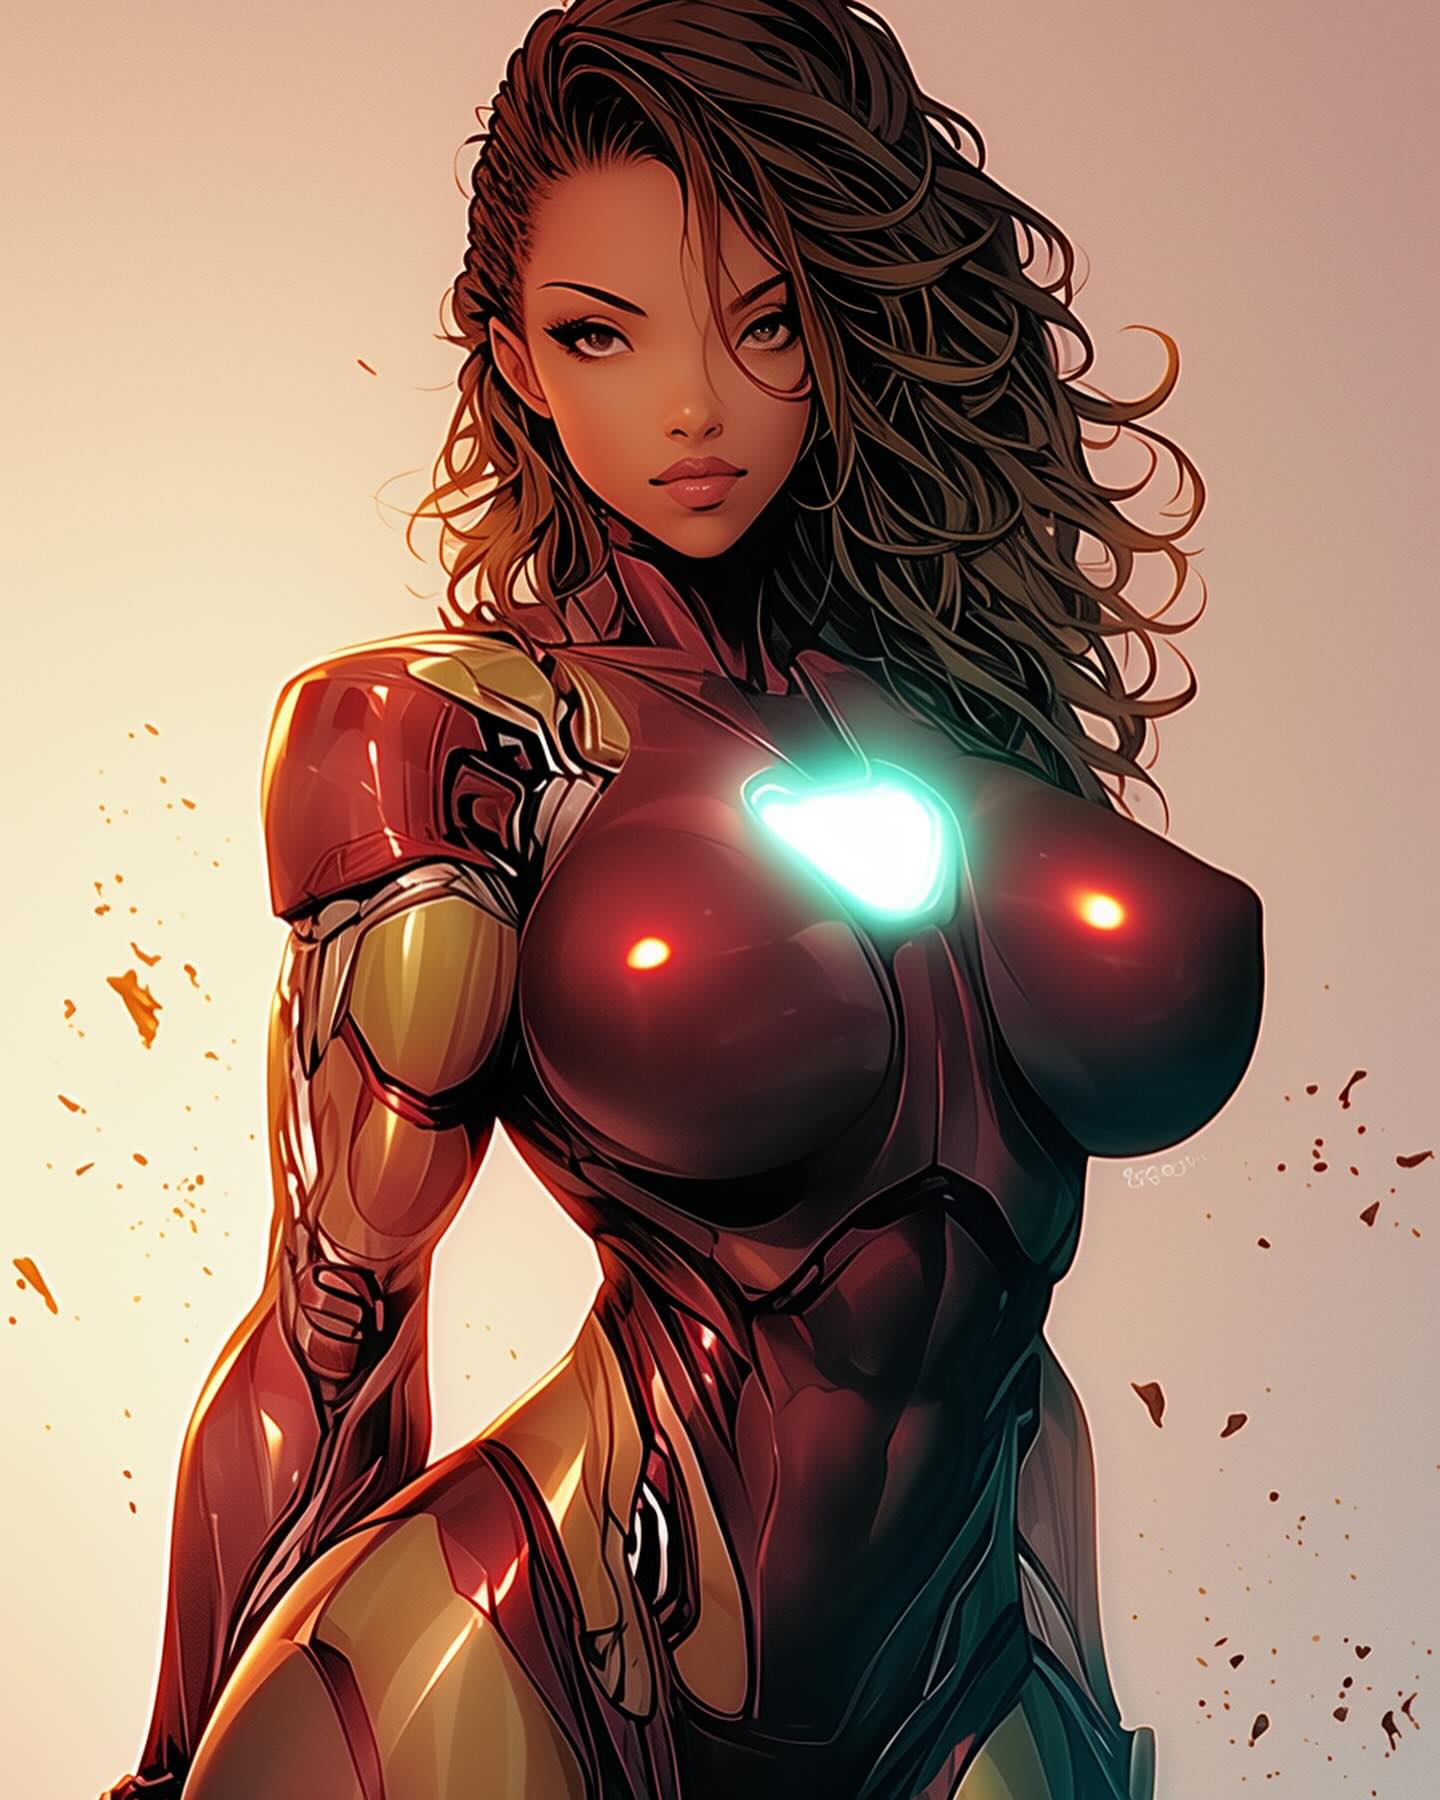 Ironheart by-432951164_17968302209705826_1232542665025722596_n 